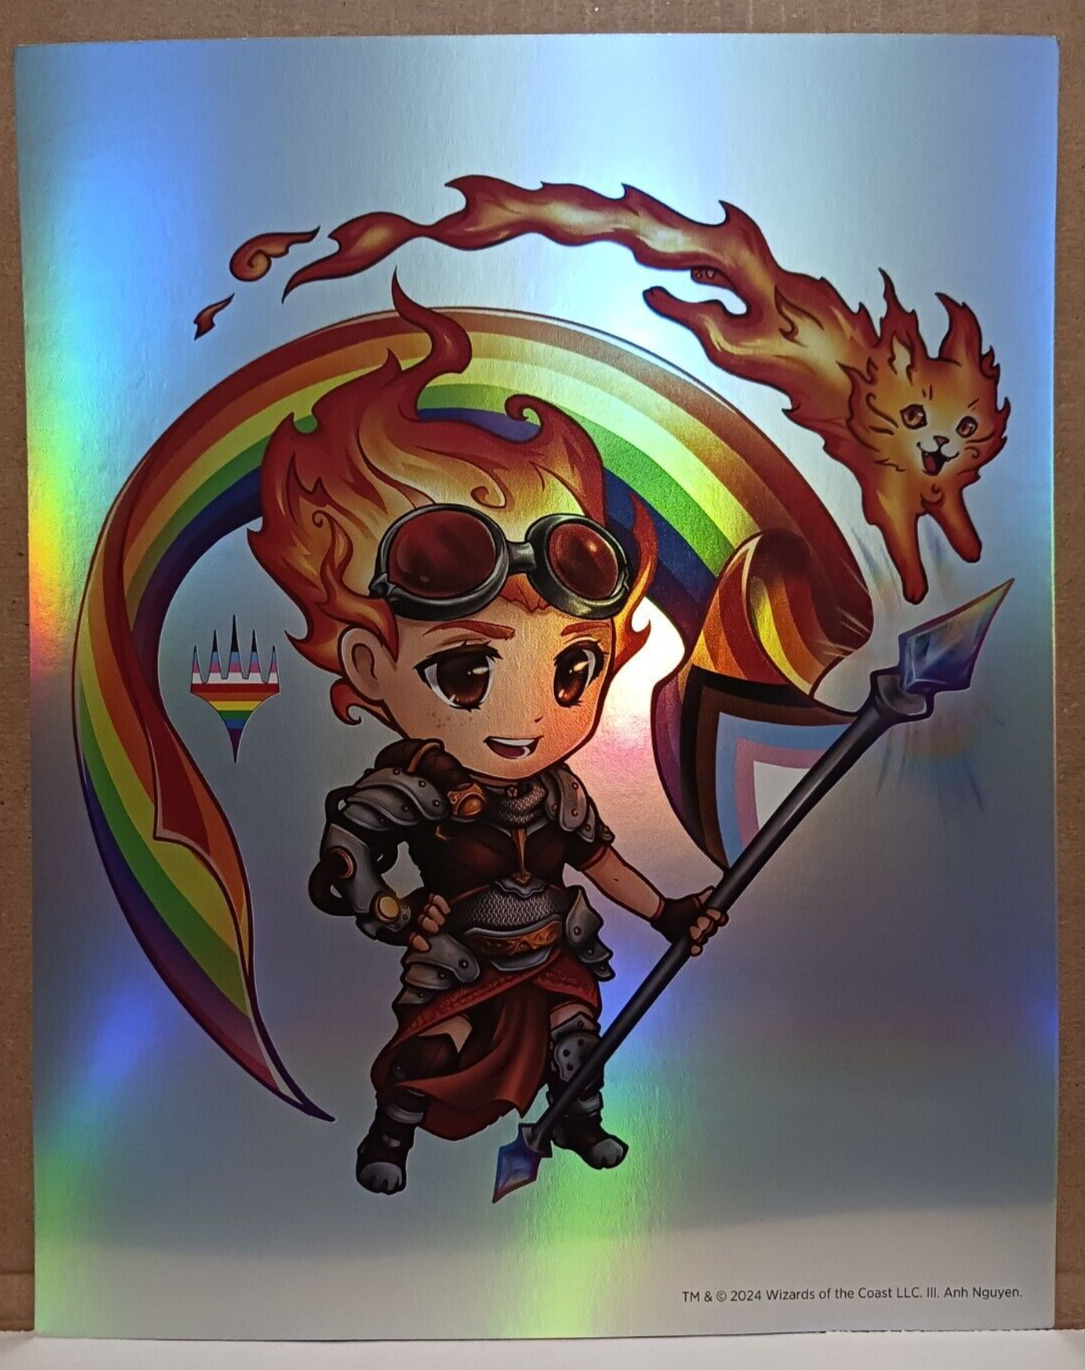 MTG Promotional Chandra /Embercat Rainbow Holographic Foil Print Posters 10 Pack